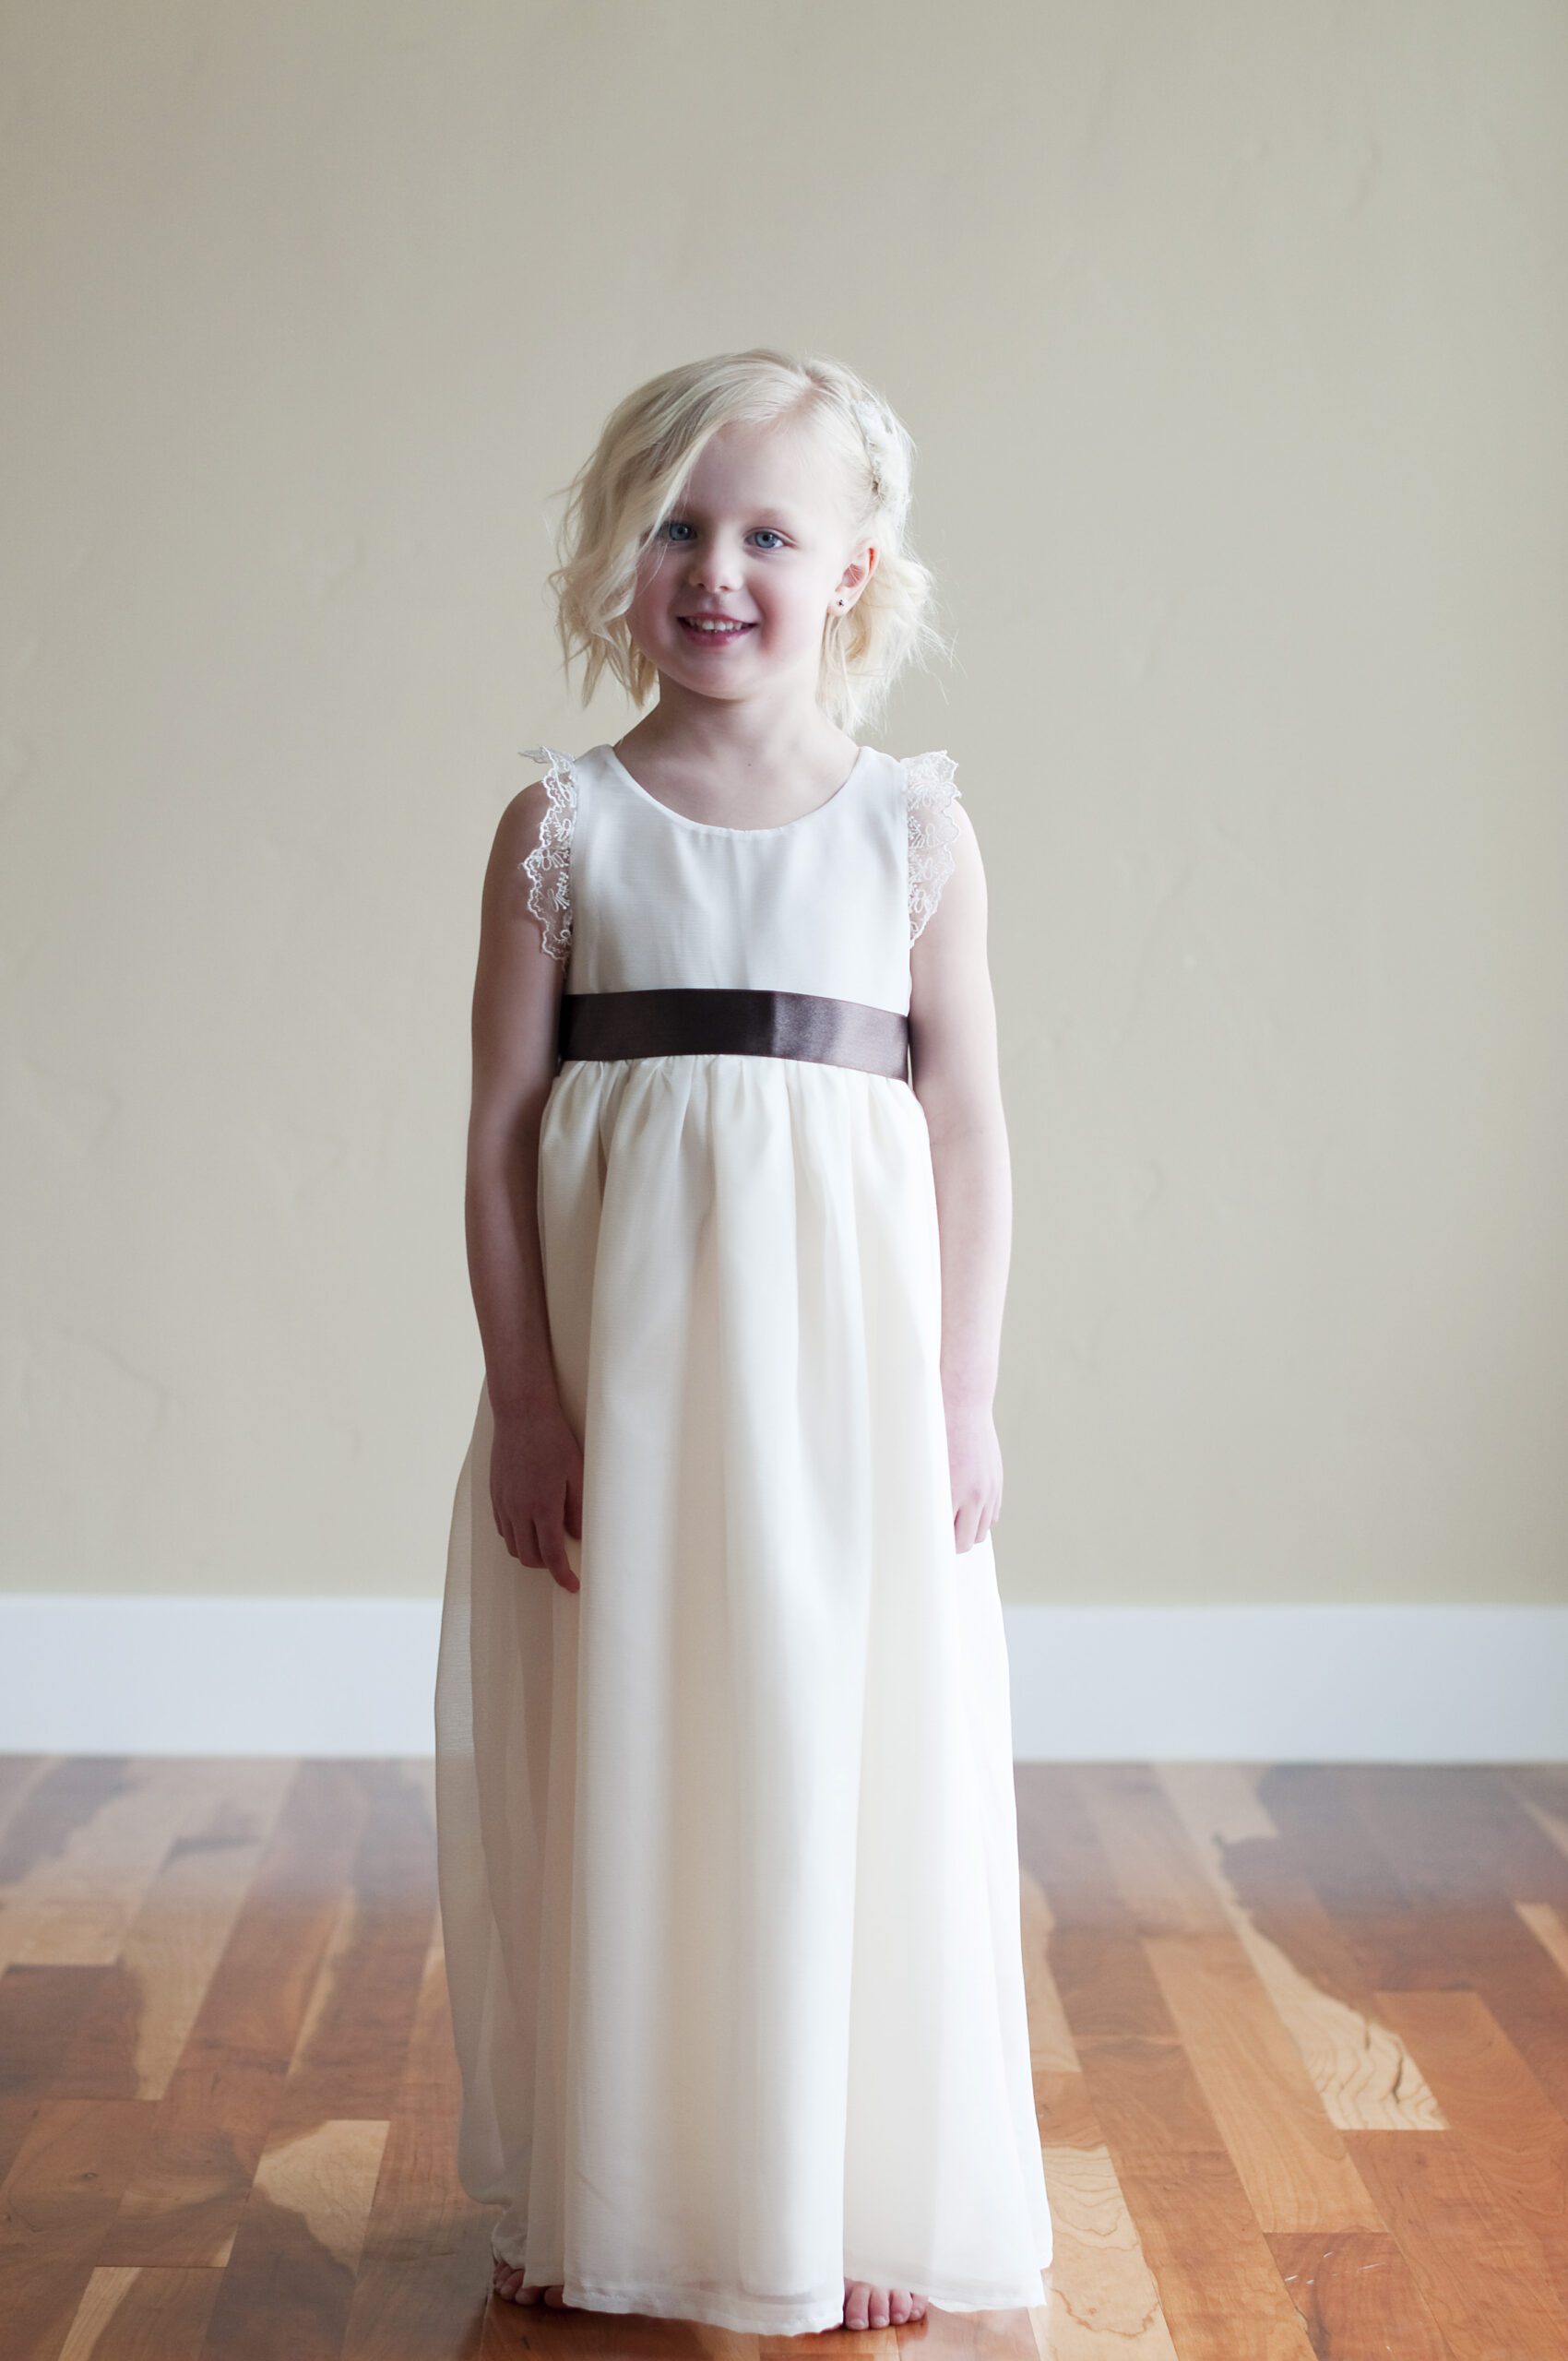 A photo of a three year old girl with blond hair wearing an ivory chiffon flower girl dress with a silver sash